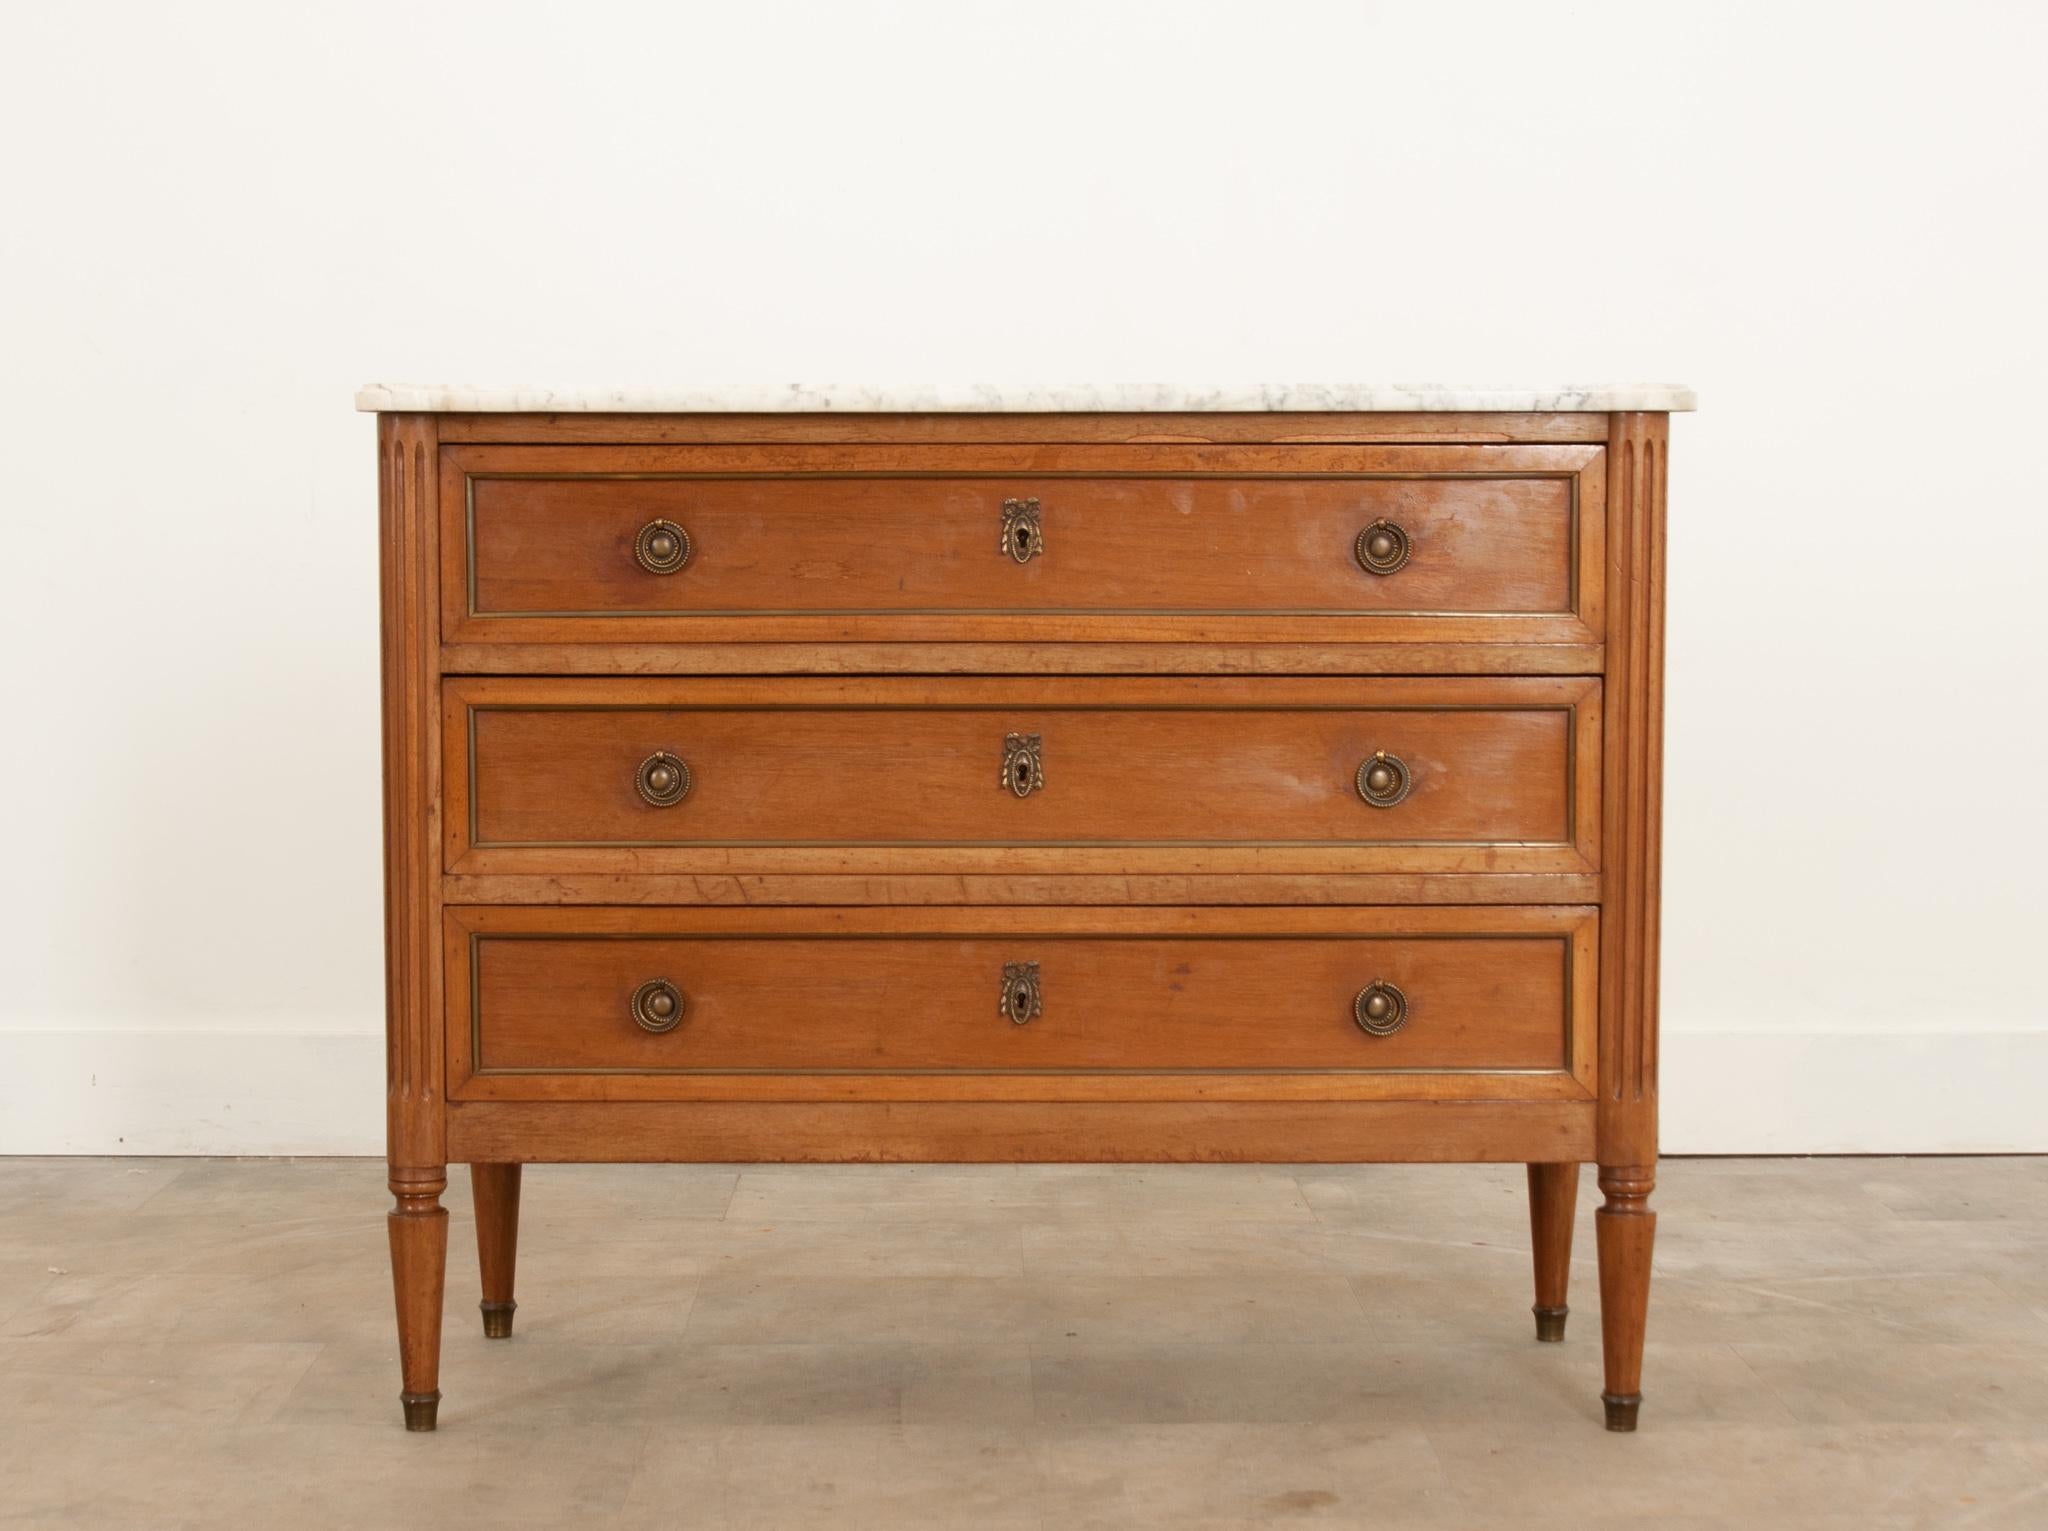 A wonderful petite mahogany, Louis XVI style commode. Its original shaped marble top is in good antique condition and has a molded edge. A bank of three drawers each have brass banding, a pair of decorative drop ring pulls, and laurel swag